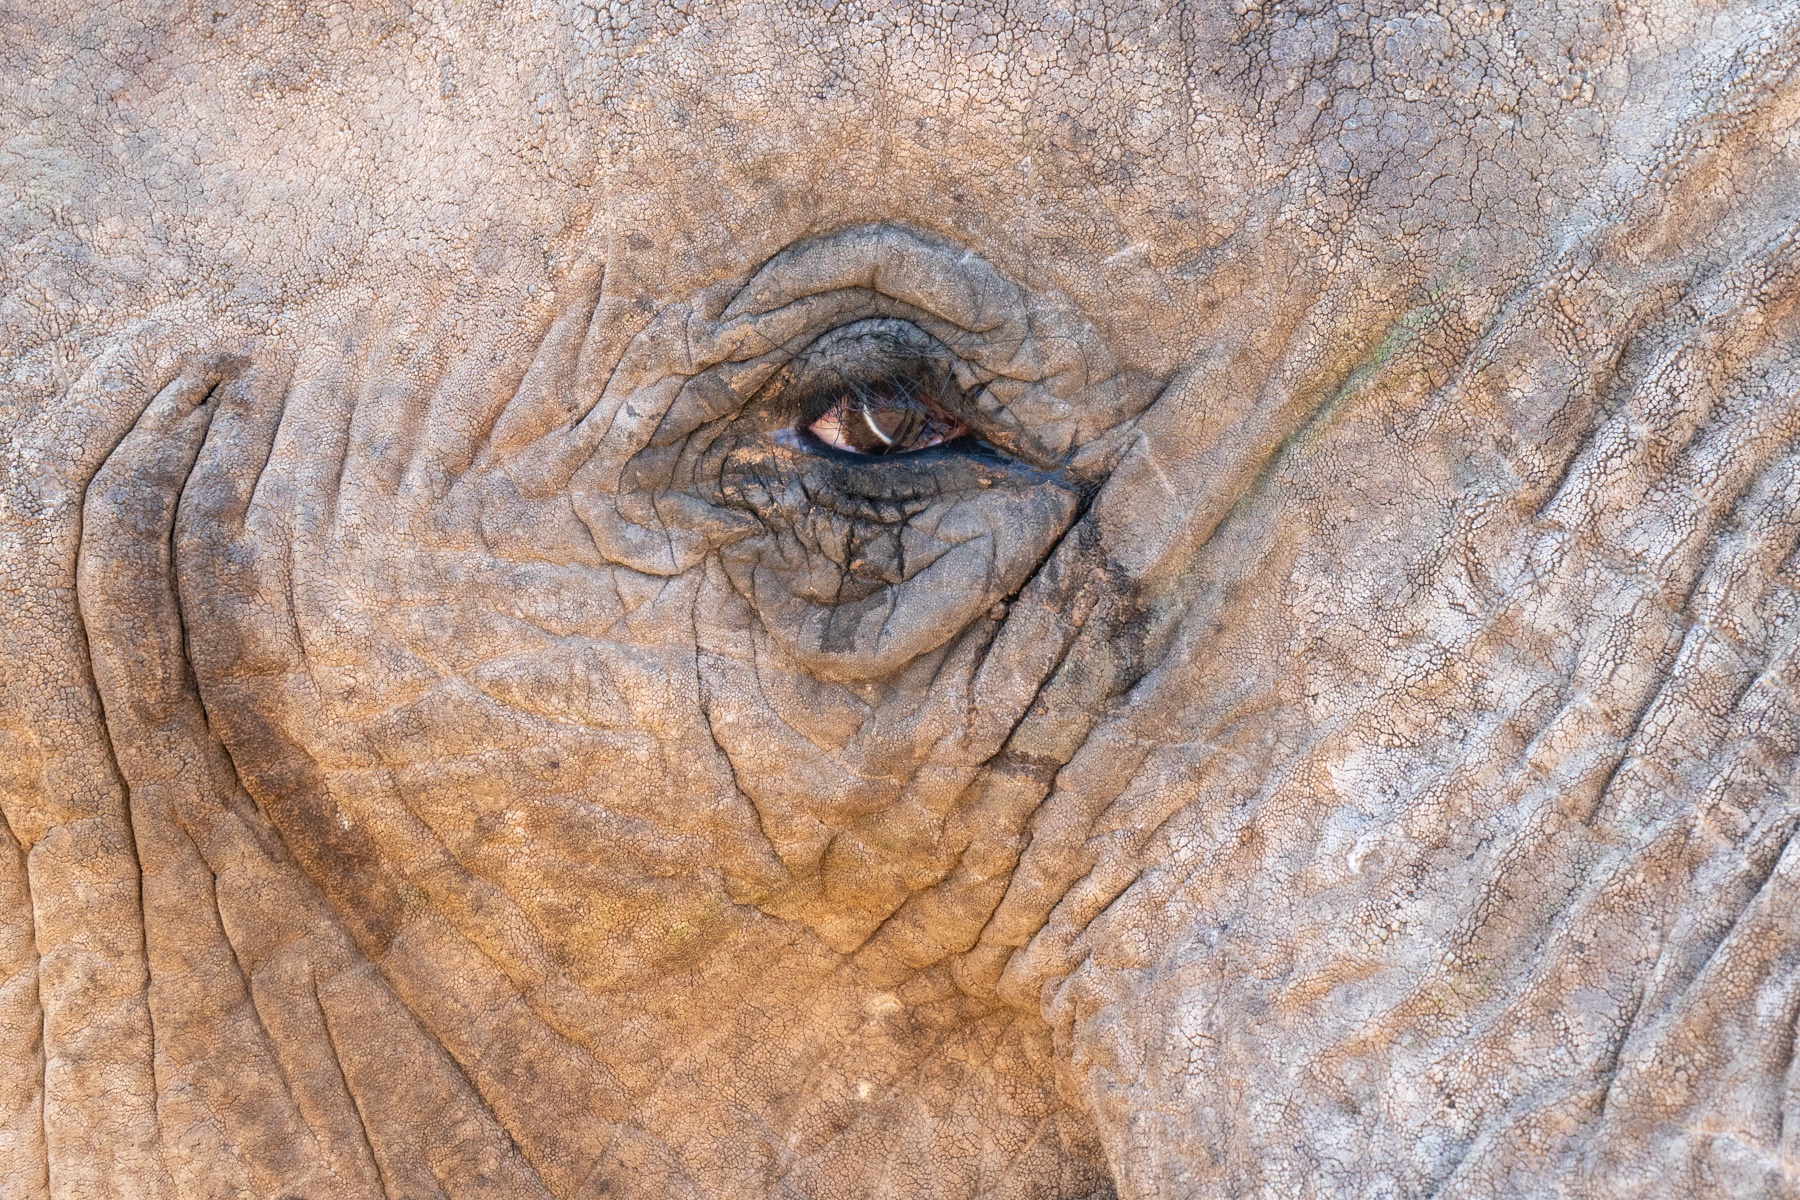 Eye to eye with Namibia's beautiful desert elephants during our wildlife photography tour